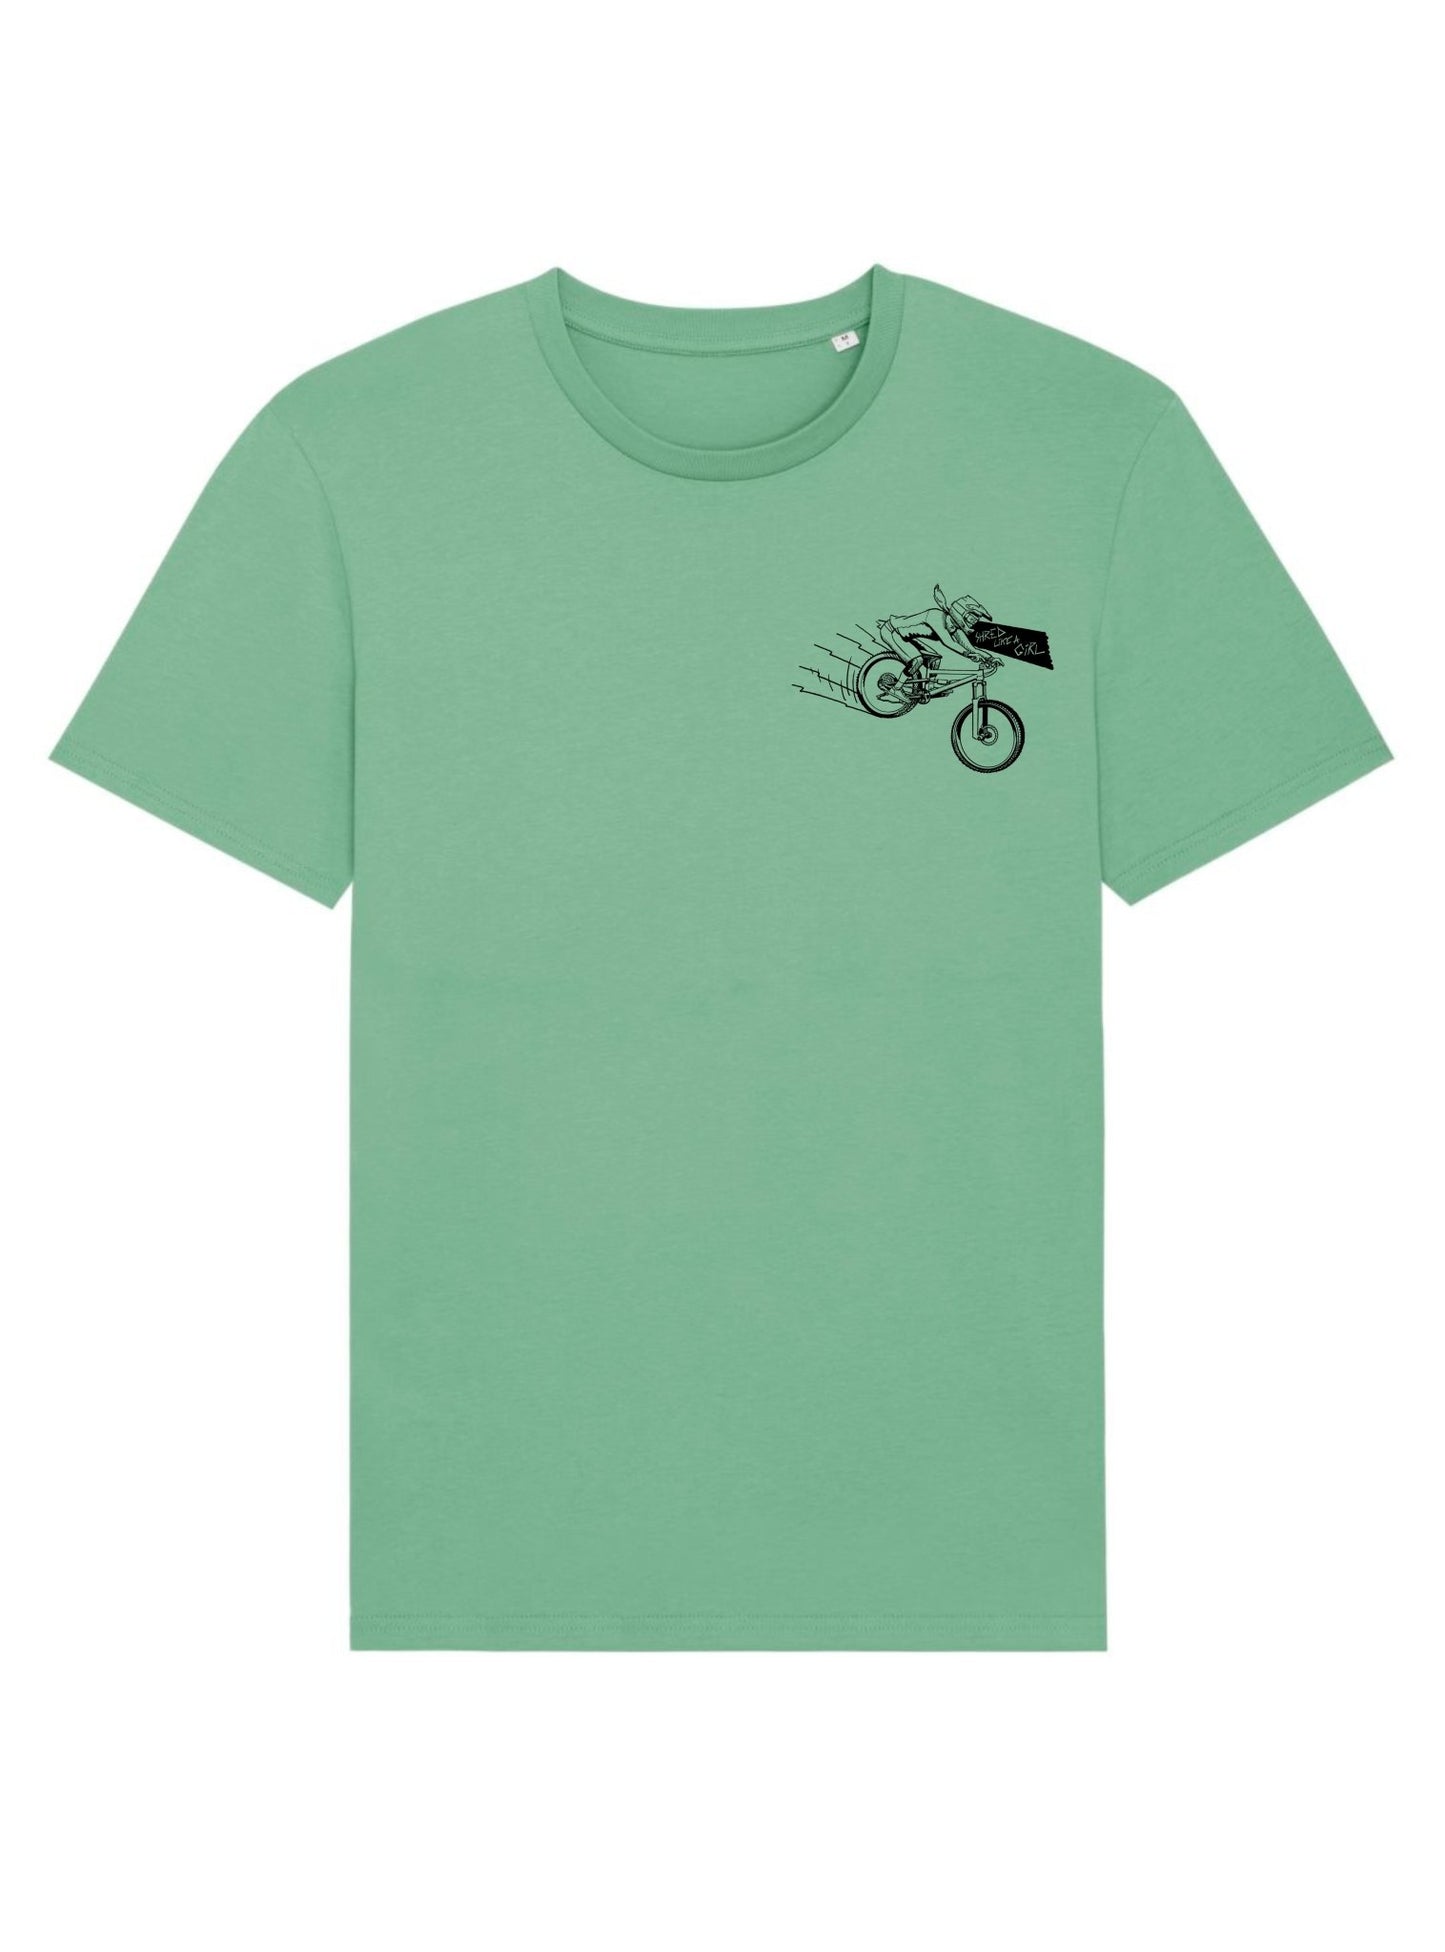 Shred Clothing | Progression Tee | Mint with Black - Shred Like a Girl